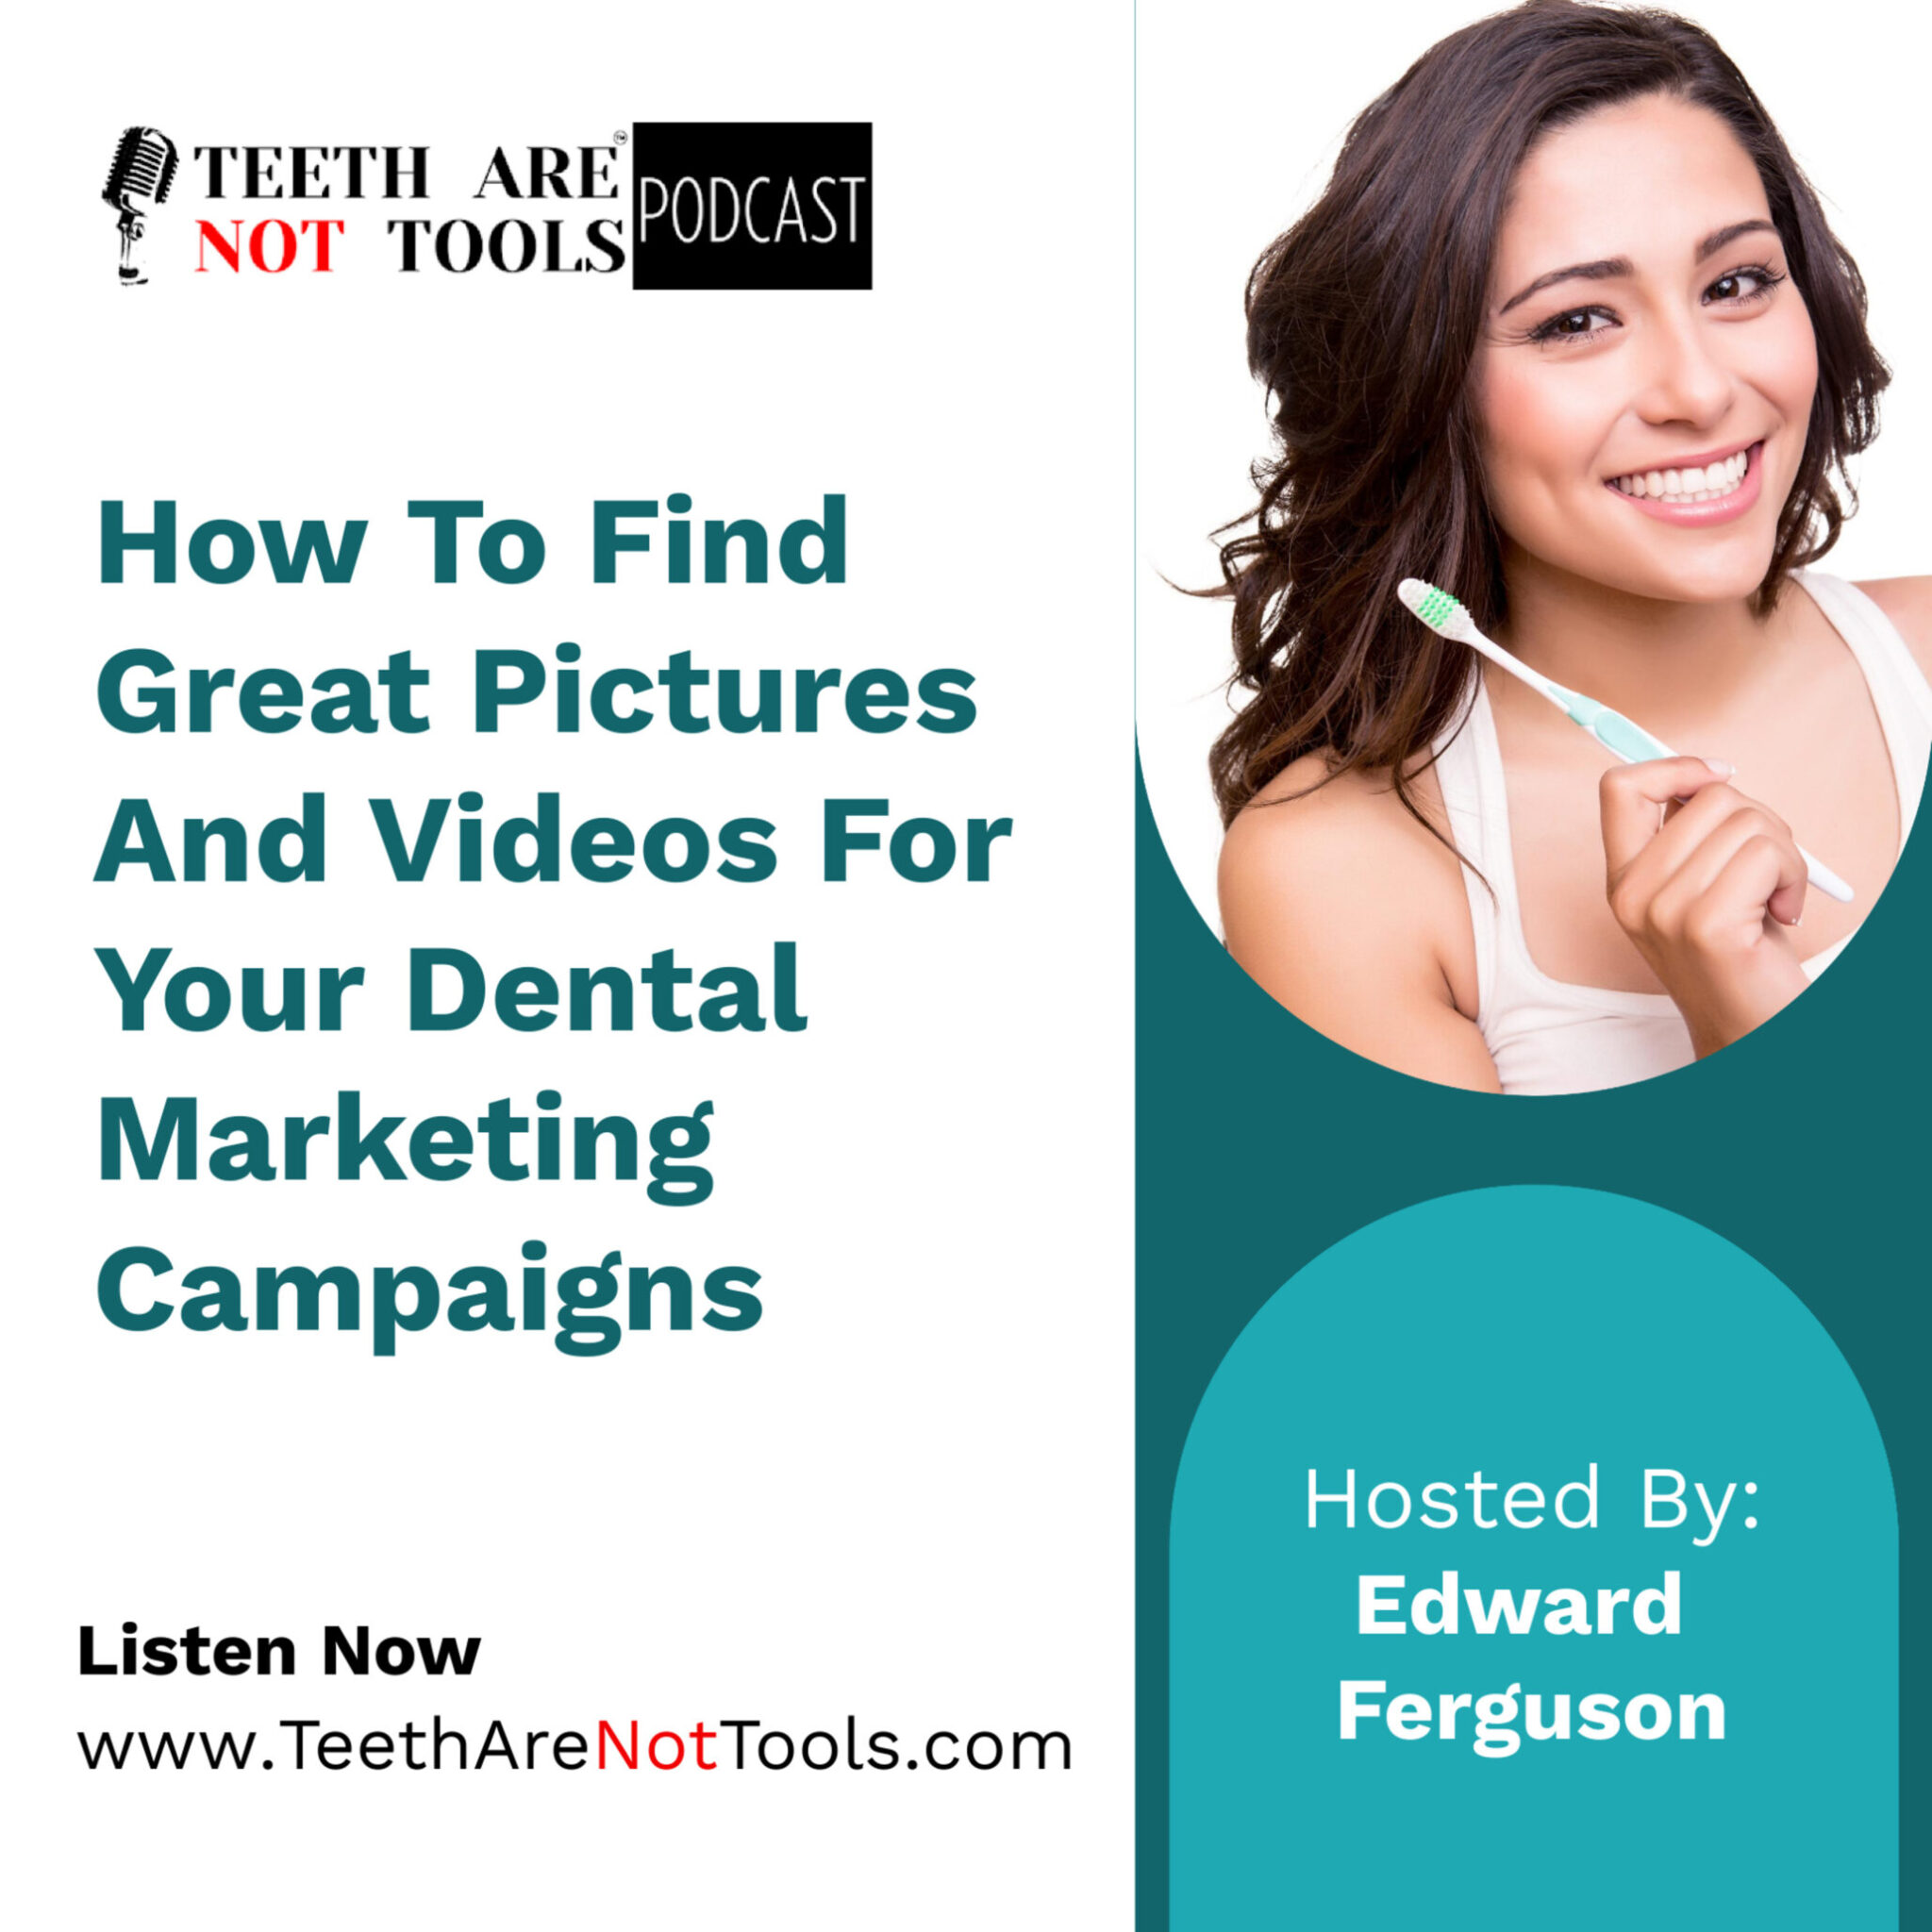 How To Find Great Pictures And Videos For Your Dental Marketing Services